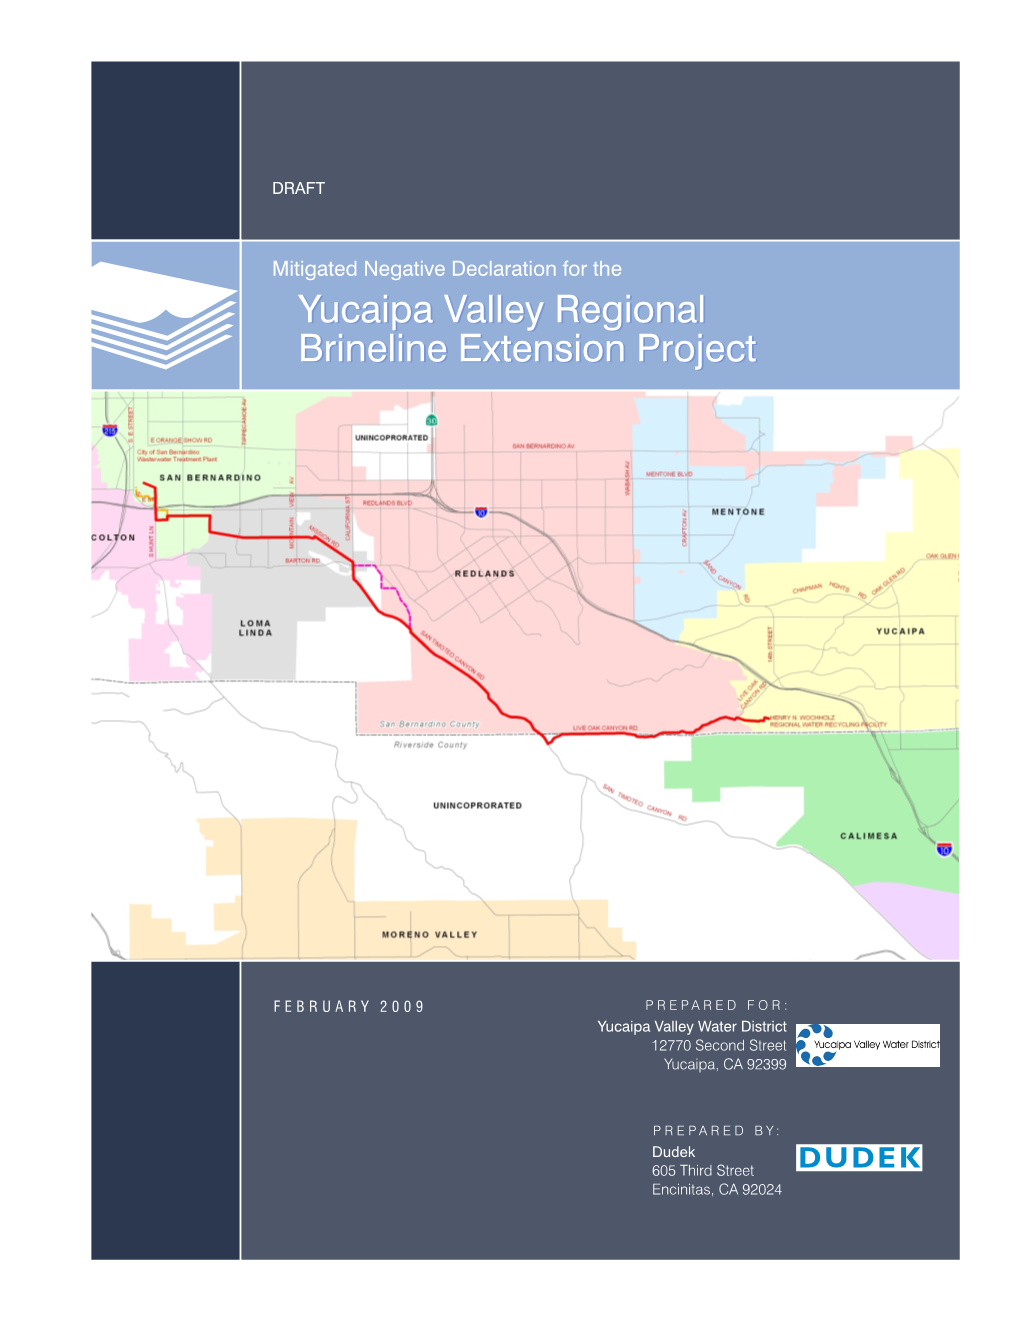 MITIGATED NEGATIVE DECLARATION for the YUCAIPA VALLEY REGIONAL BRINELINE EXTENSION PROJECT